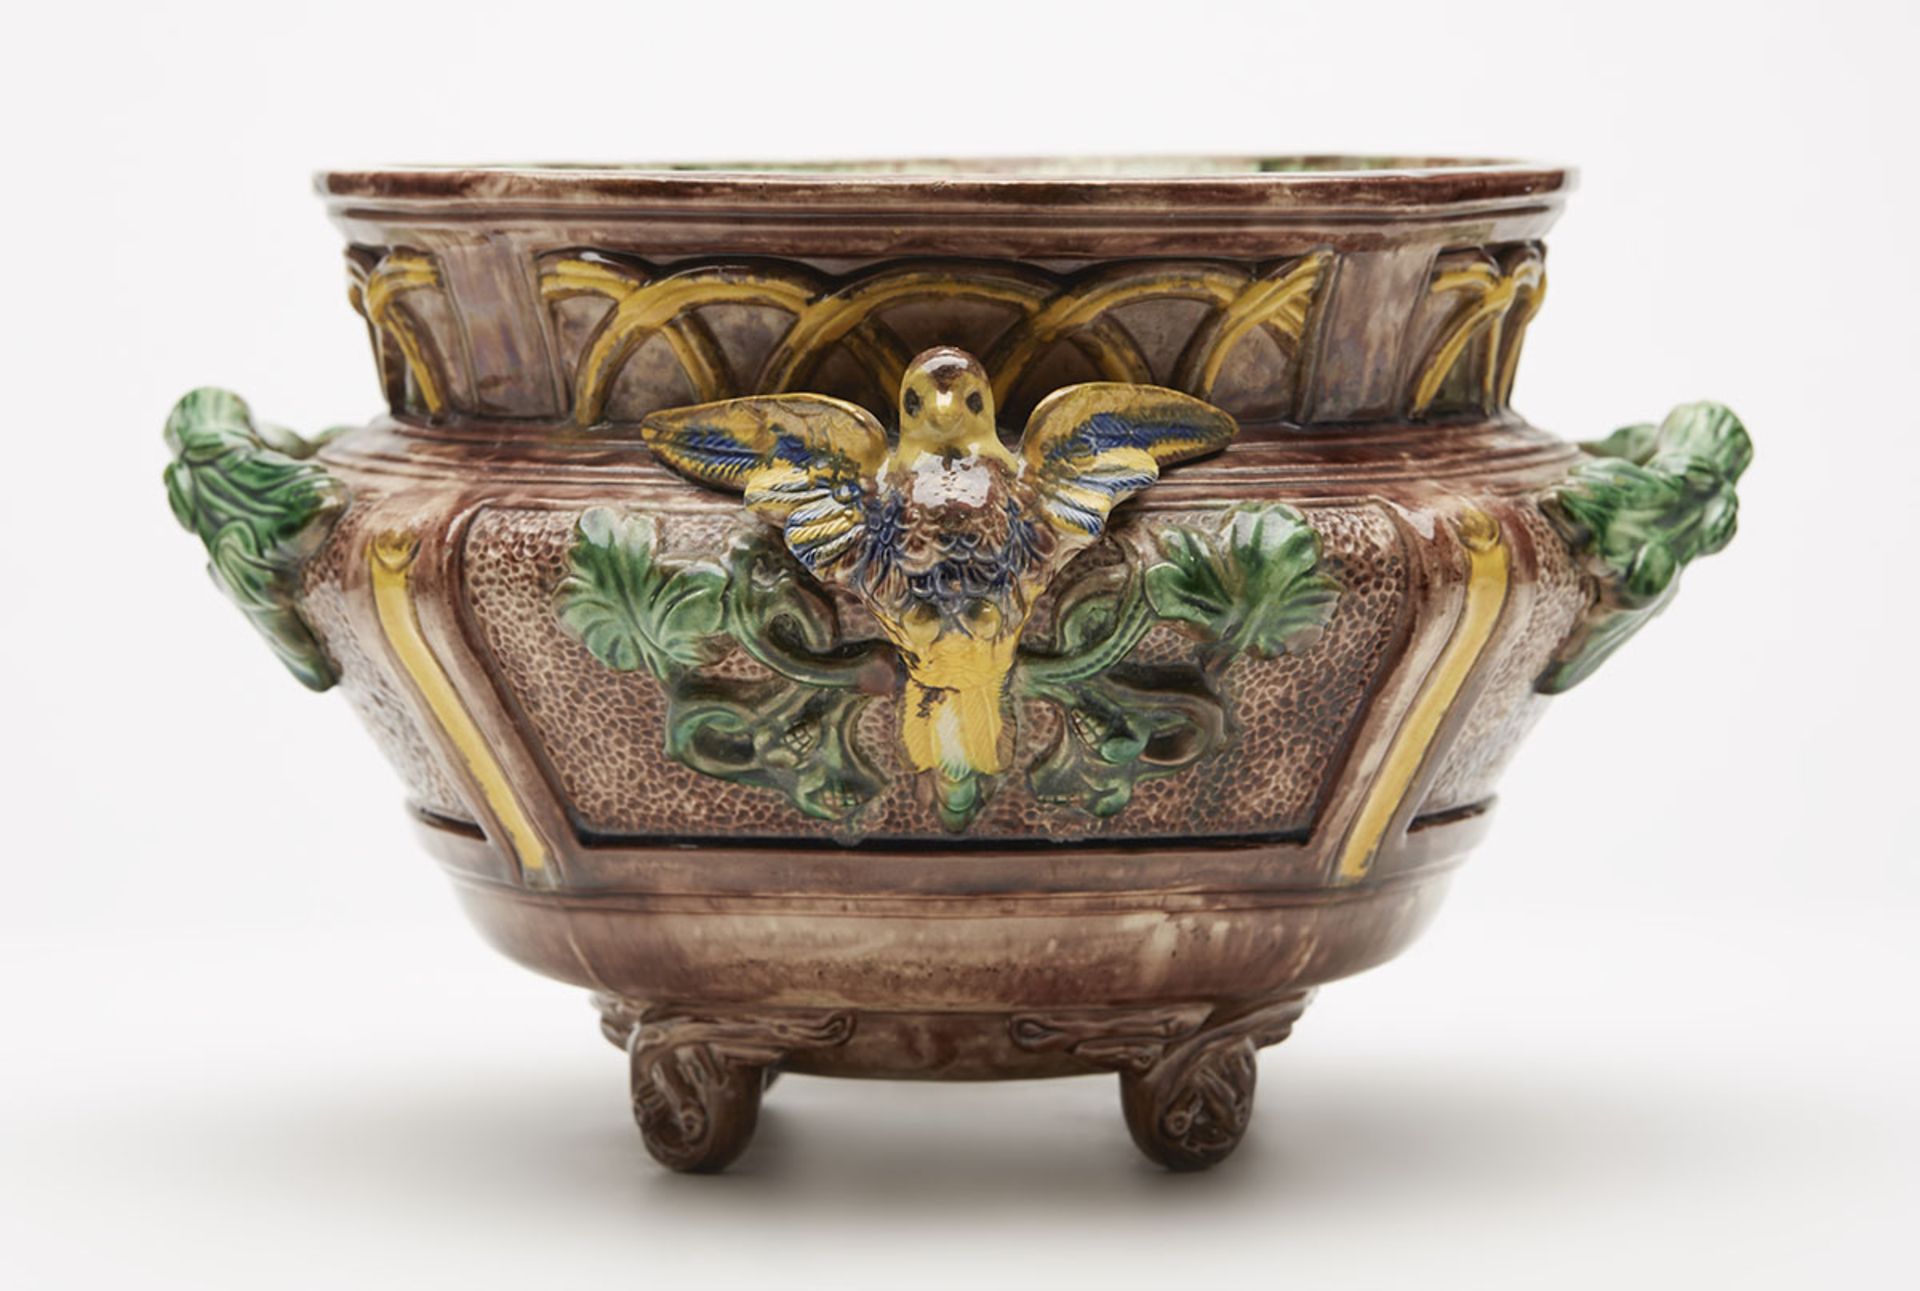 Antique French St Honore Palissy Majolica Planter 19Th C.